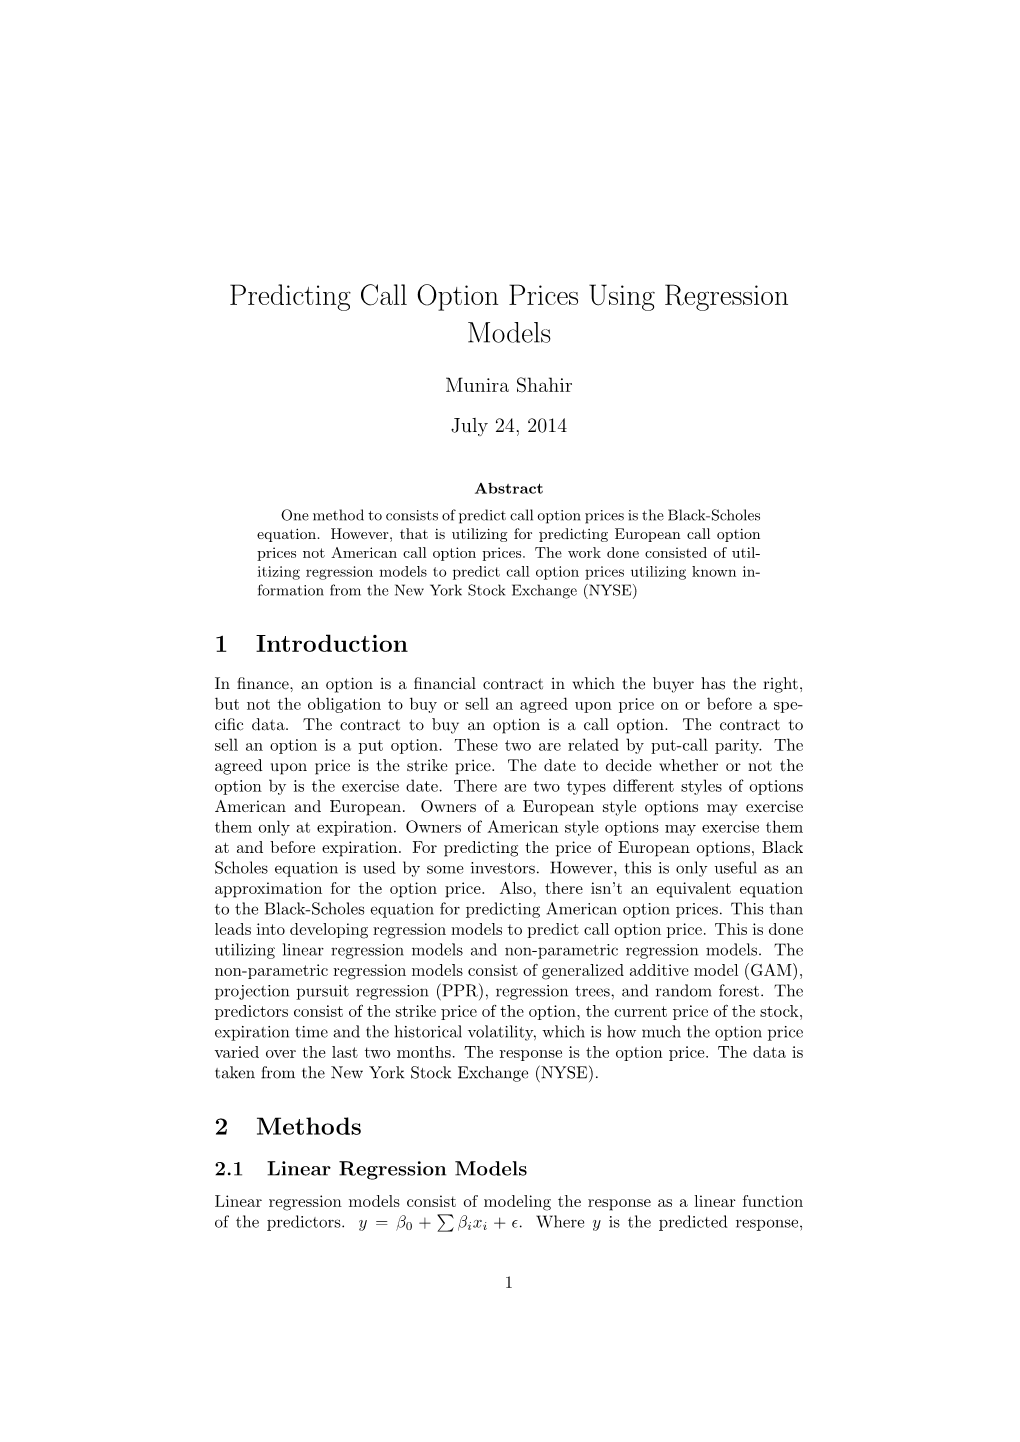 Predicting Call Option Prices Using Regression Models